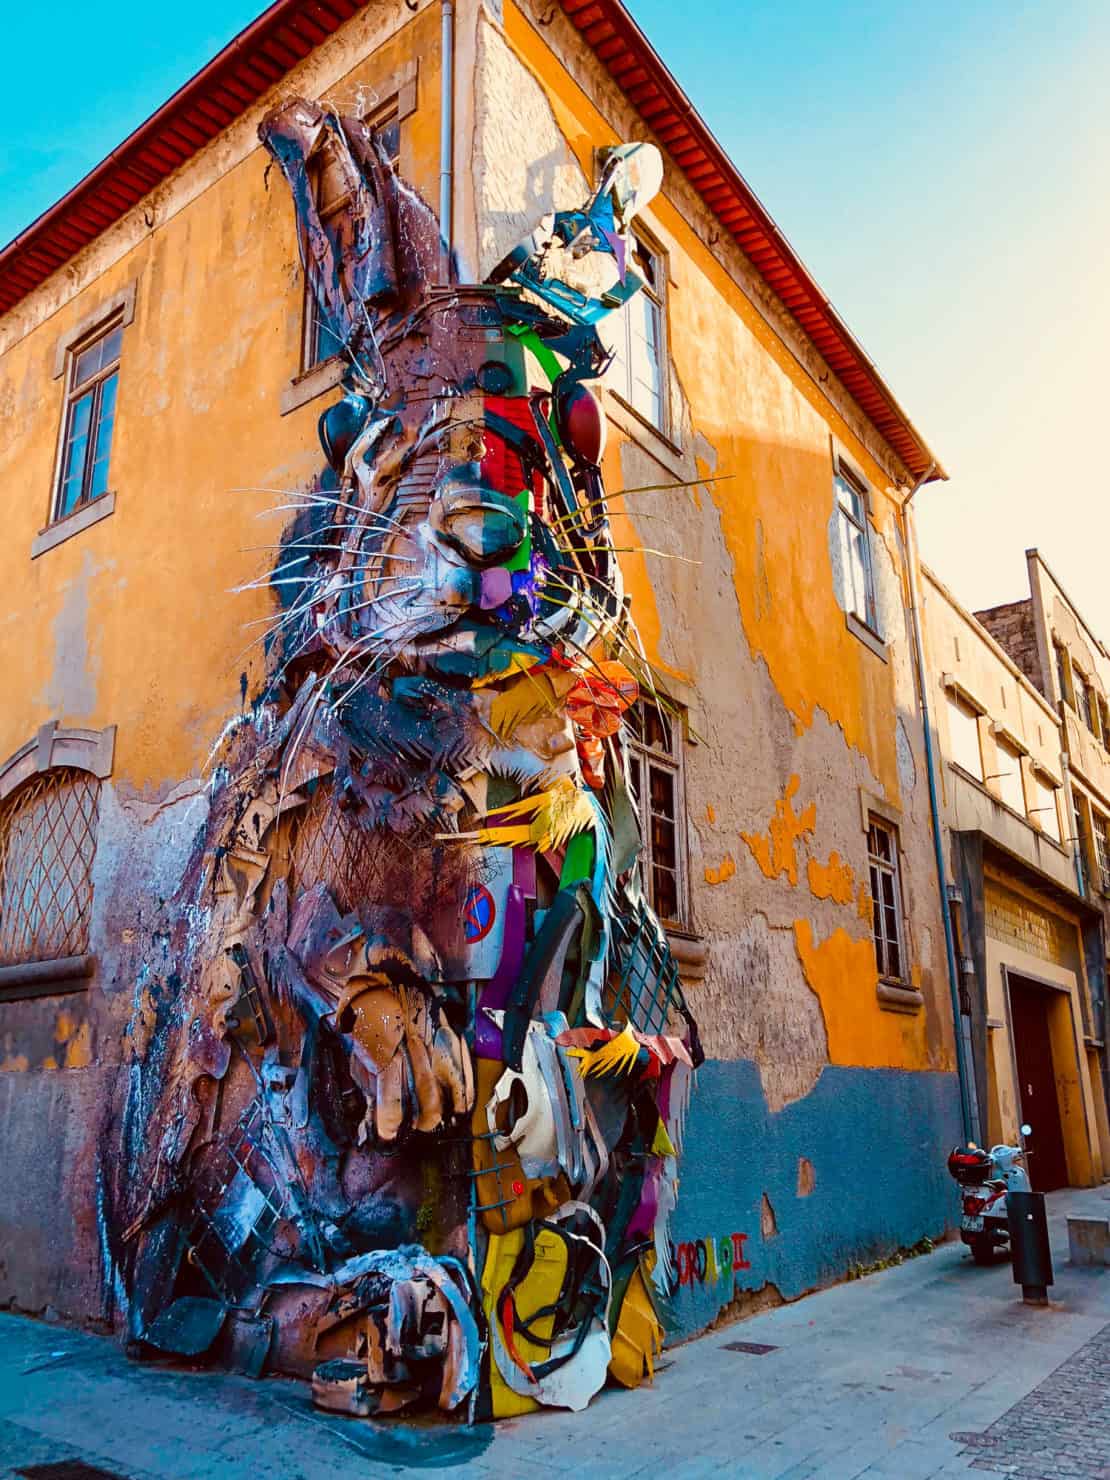 Portugal - Porto - This impressive rabbit street art shows how there is always more to see on any Spain and Portugal itinerary